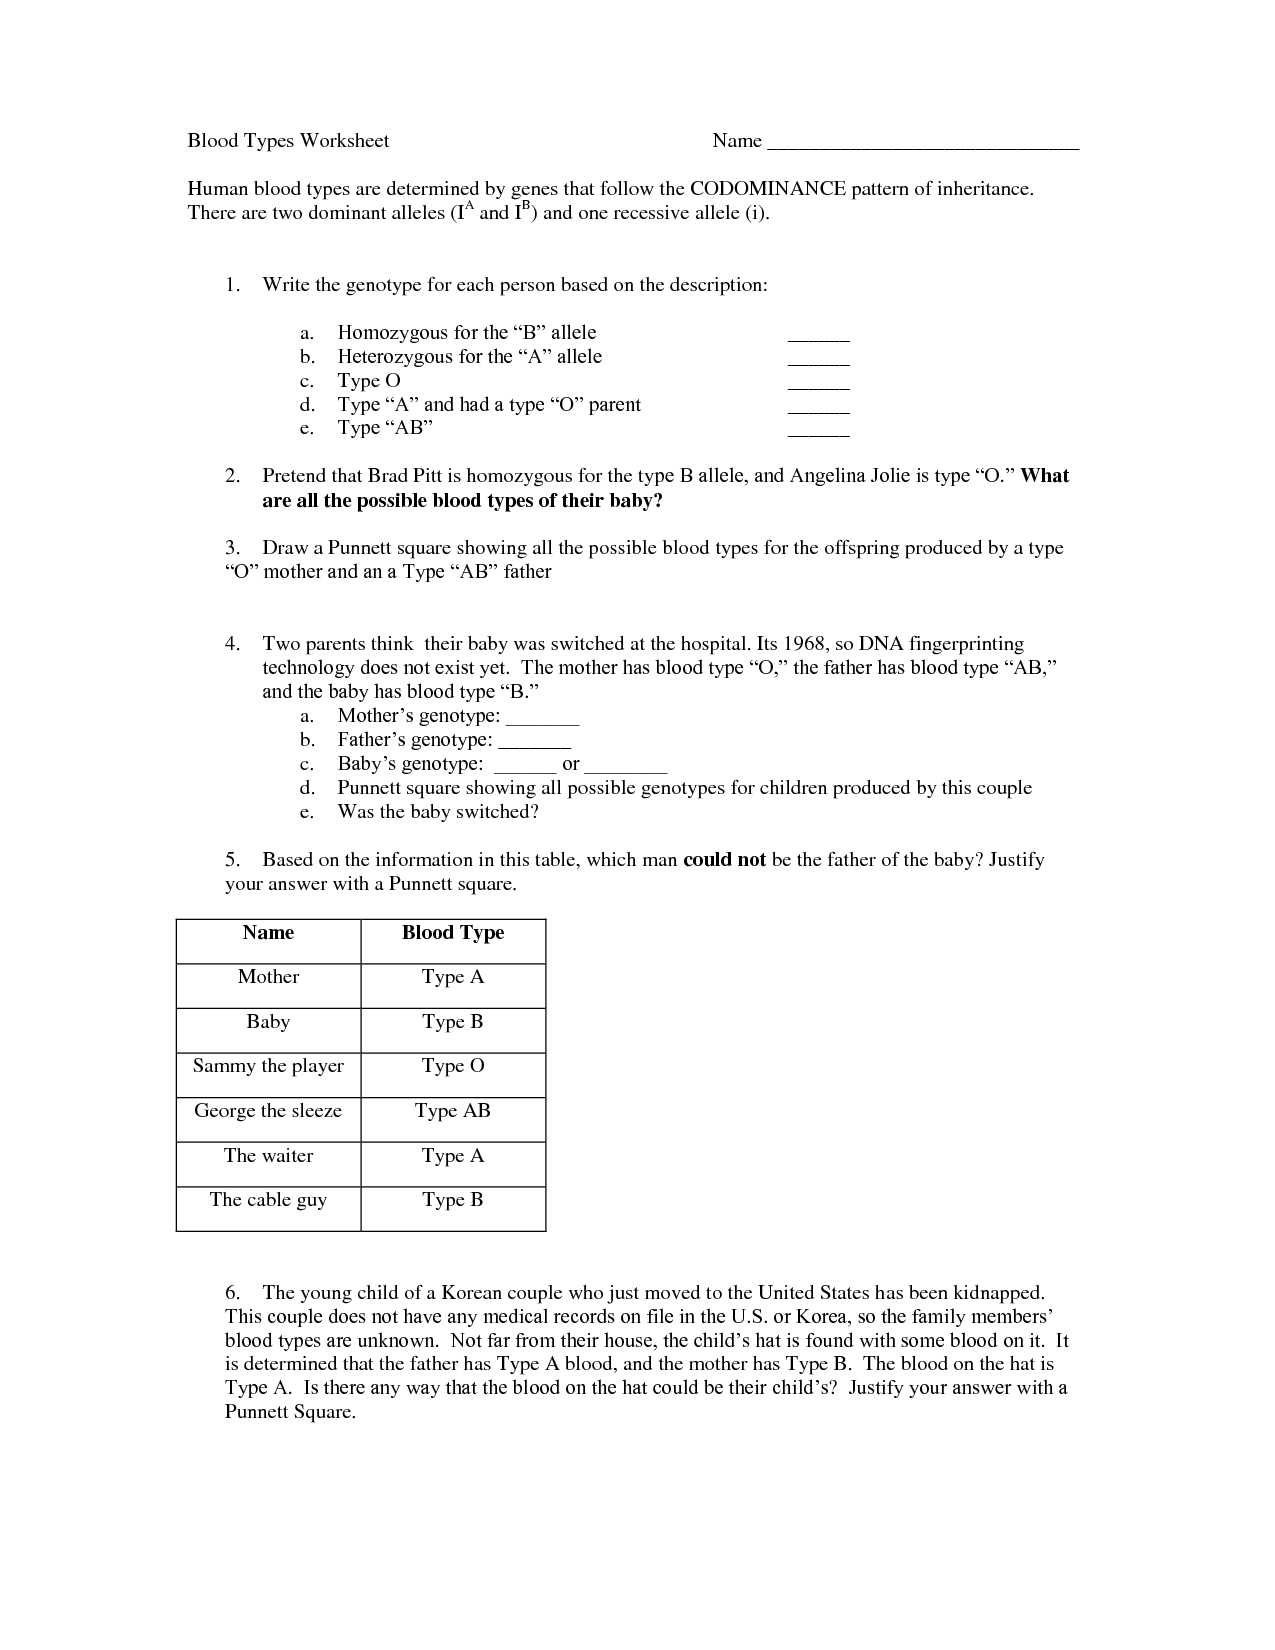 Dna Fingerprinting Worksheet Answer Key Along with Codominance Worksheet Blood Types Answers the Best Worksheets Image